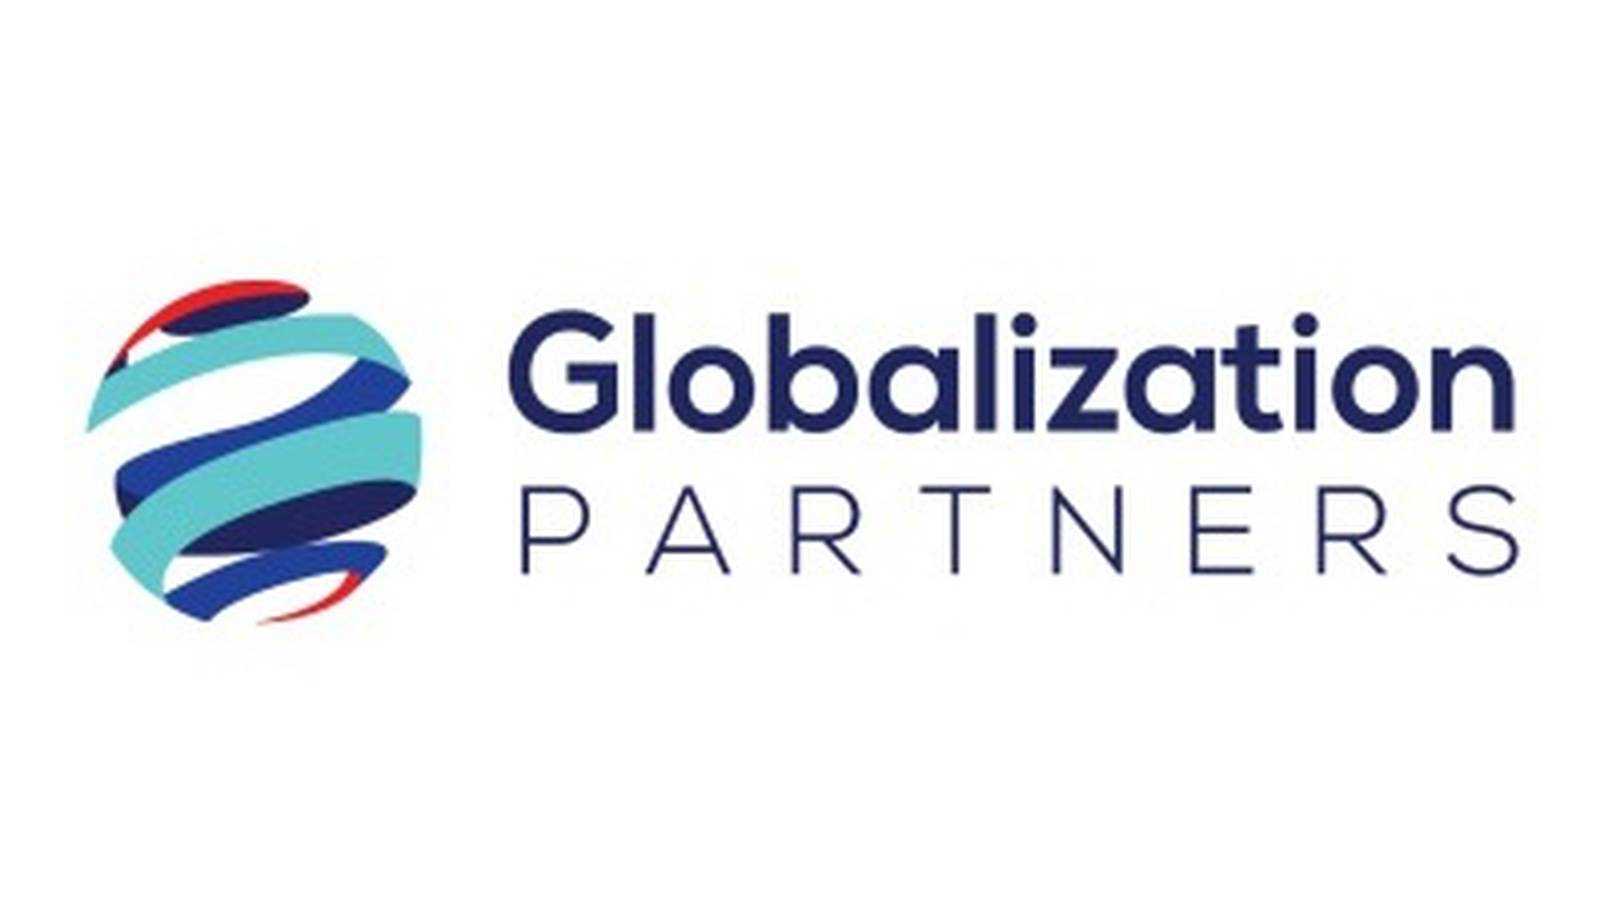 Globalization Partners to create additional 100 jobs in Galway The